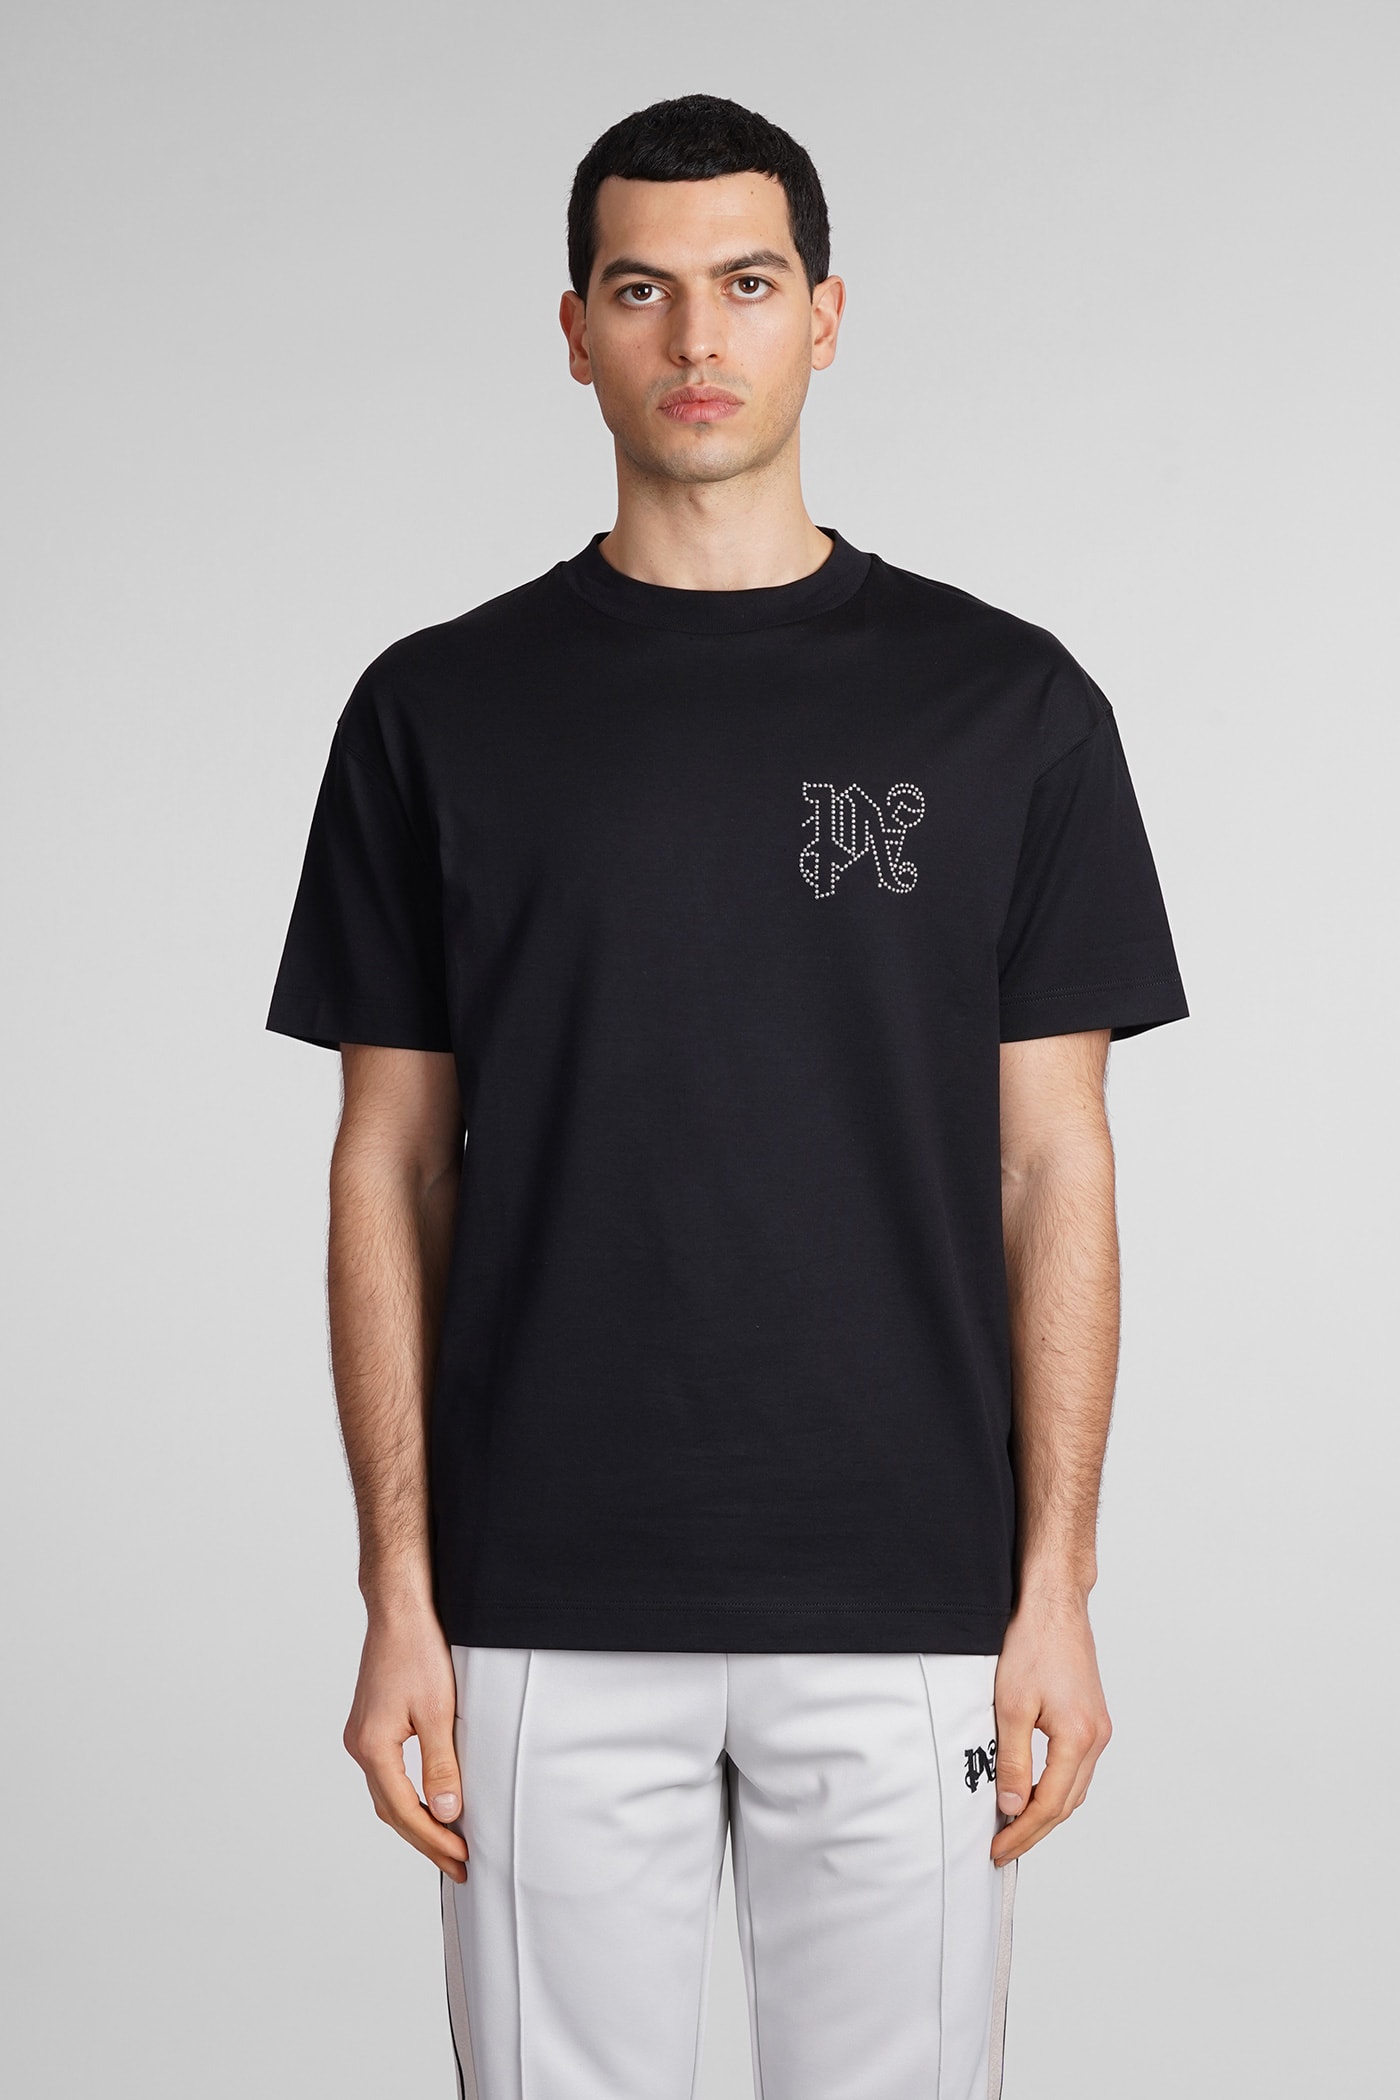 Palm Angels T-shirt In Black Cotton